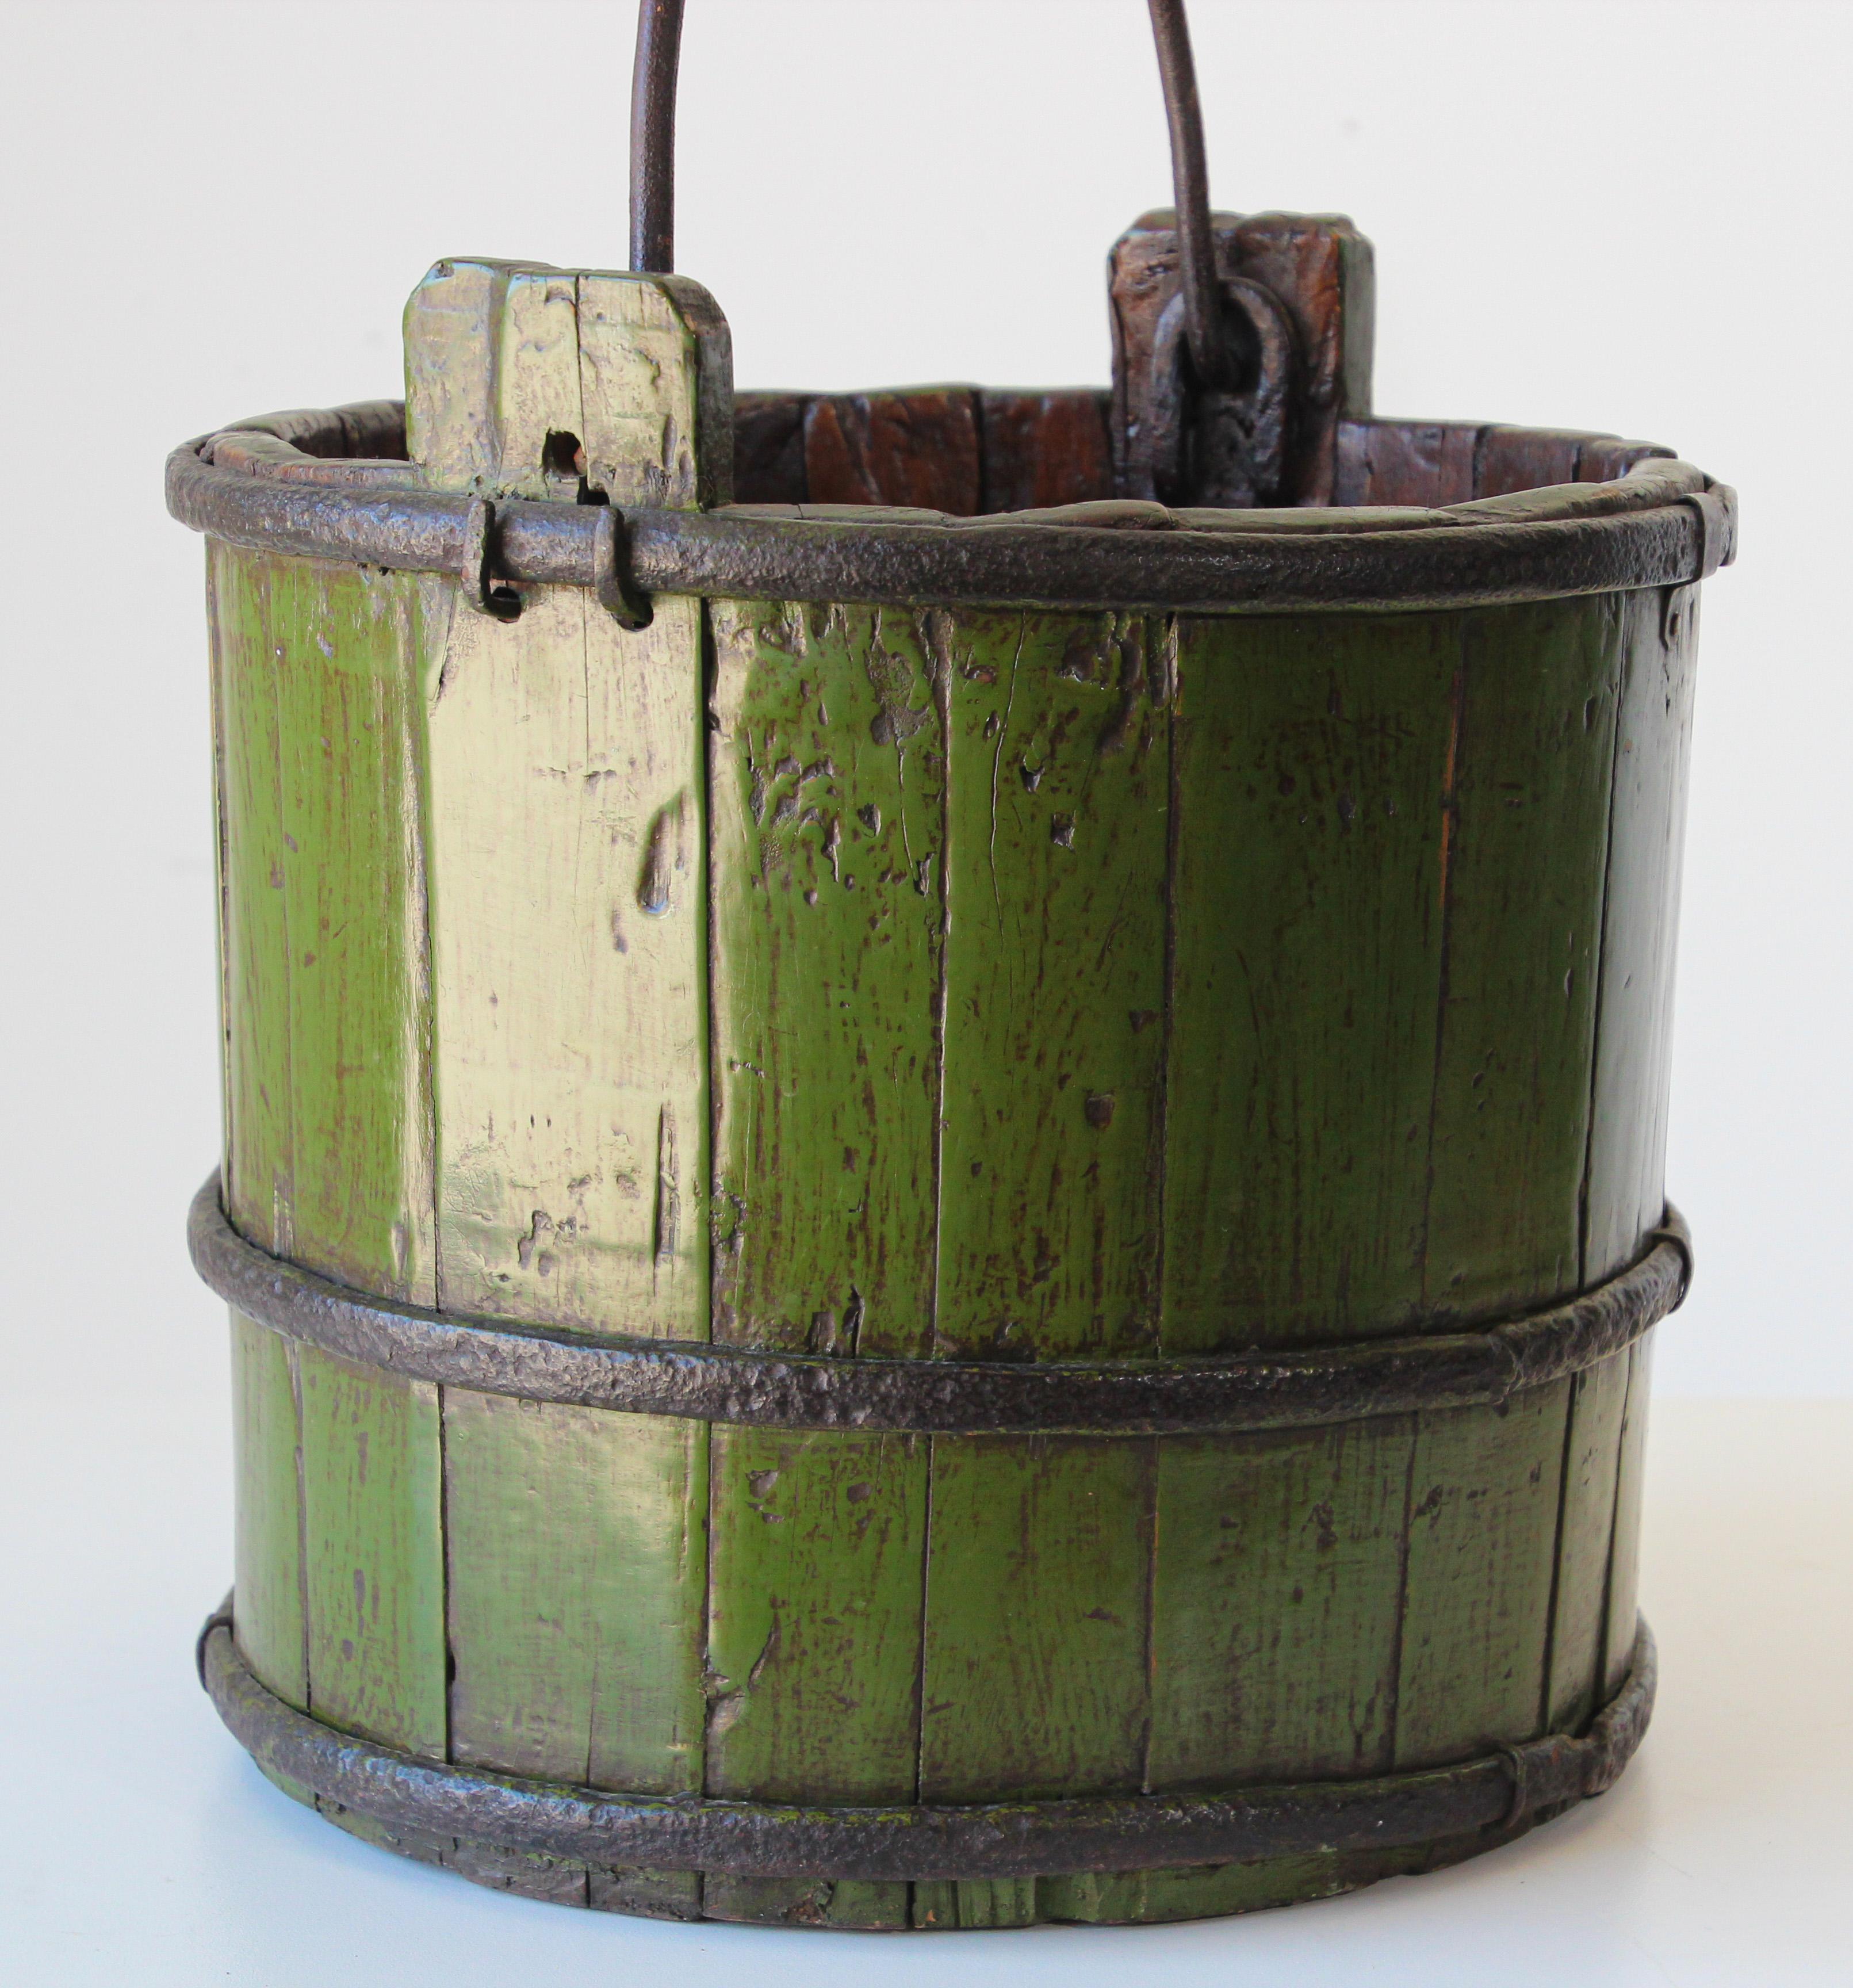 Antique Asian Chinese wood water bucket with wrought iron bands.
Early handmade water well wood with hand forged iron bands and handle.
A classically shaped antique Chinese wood water bucket with original cast iron handles and straps with lovely